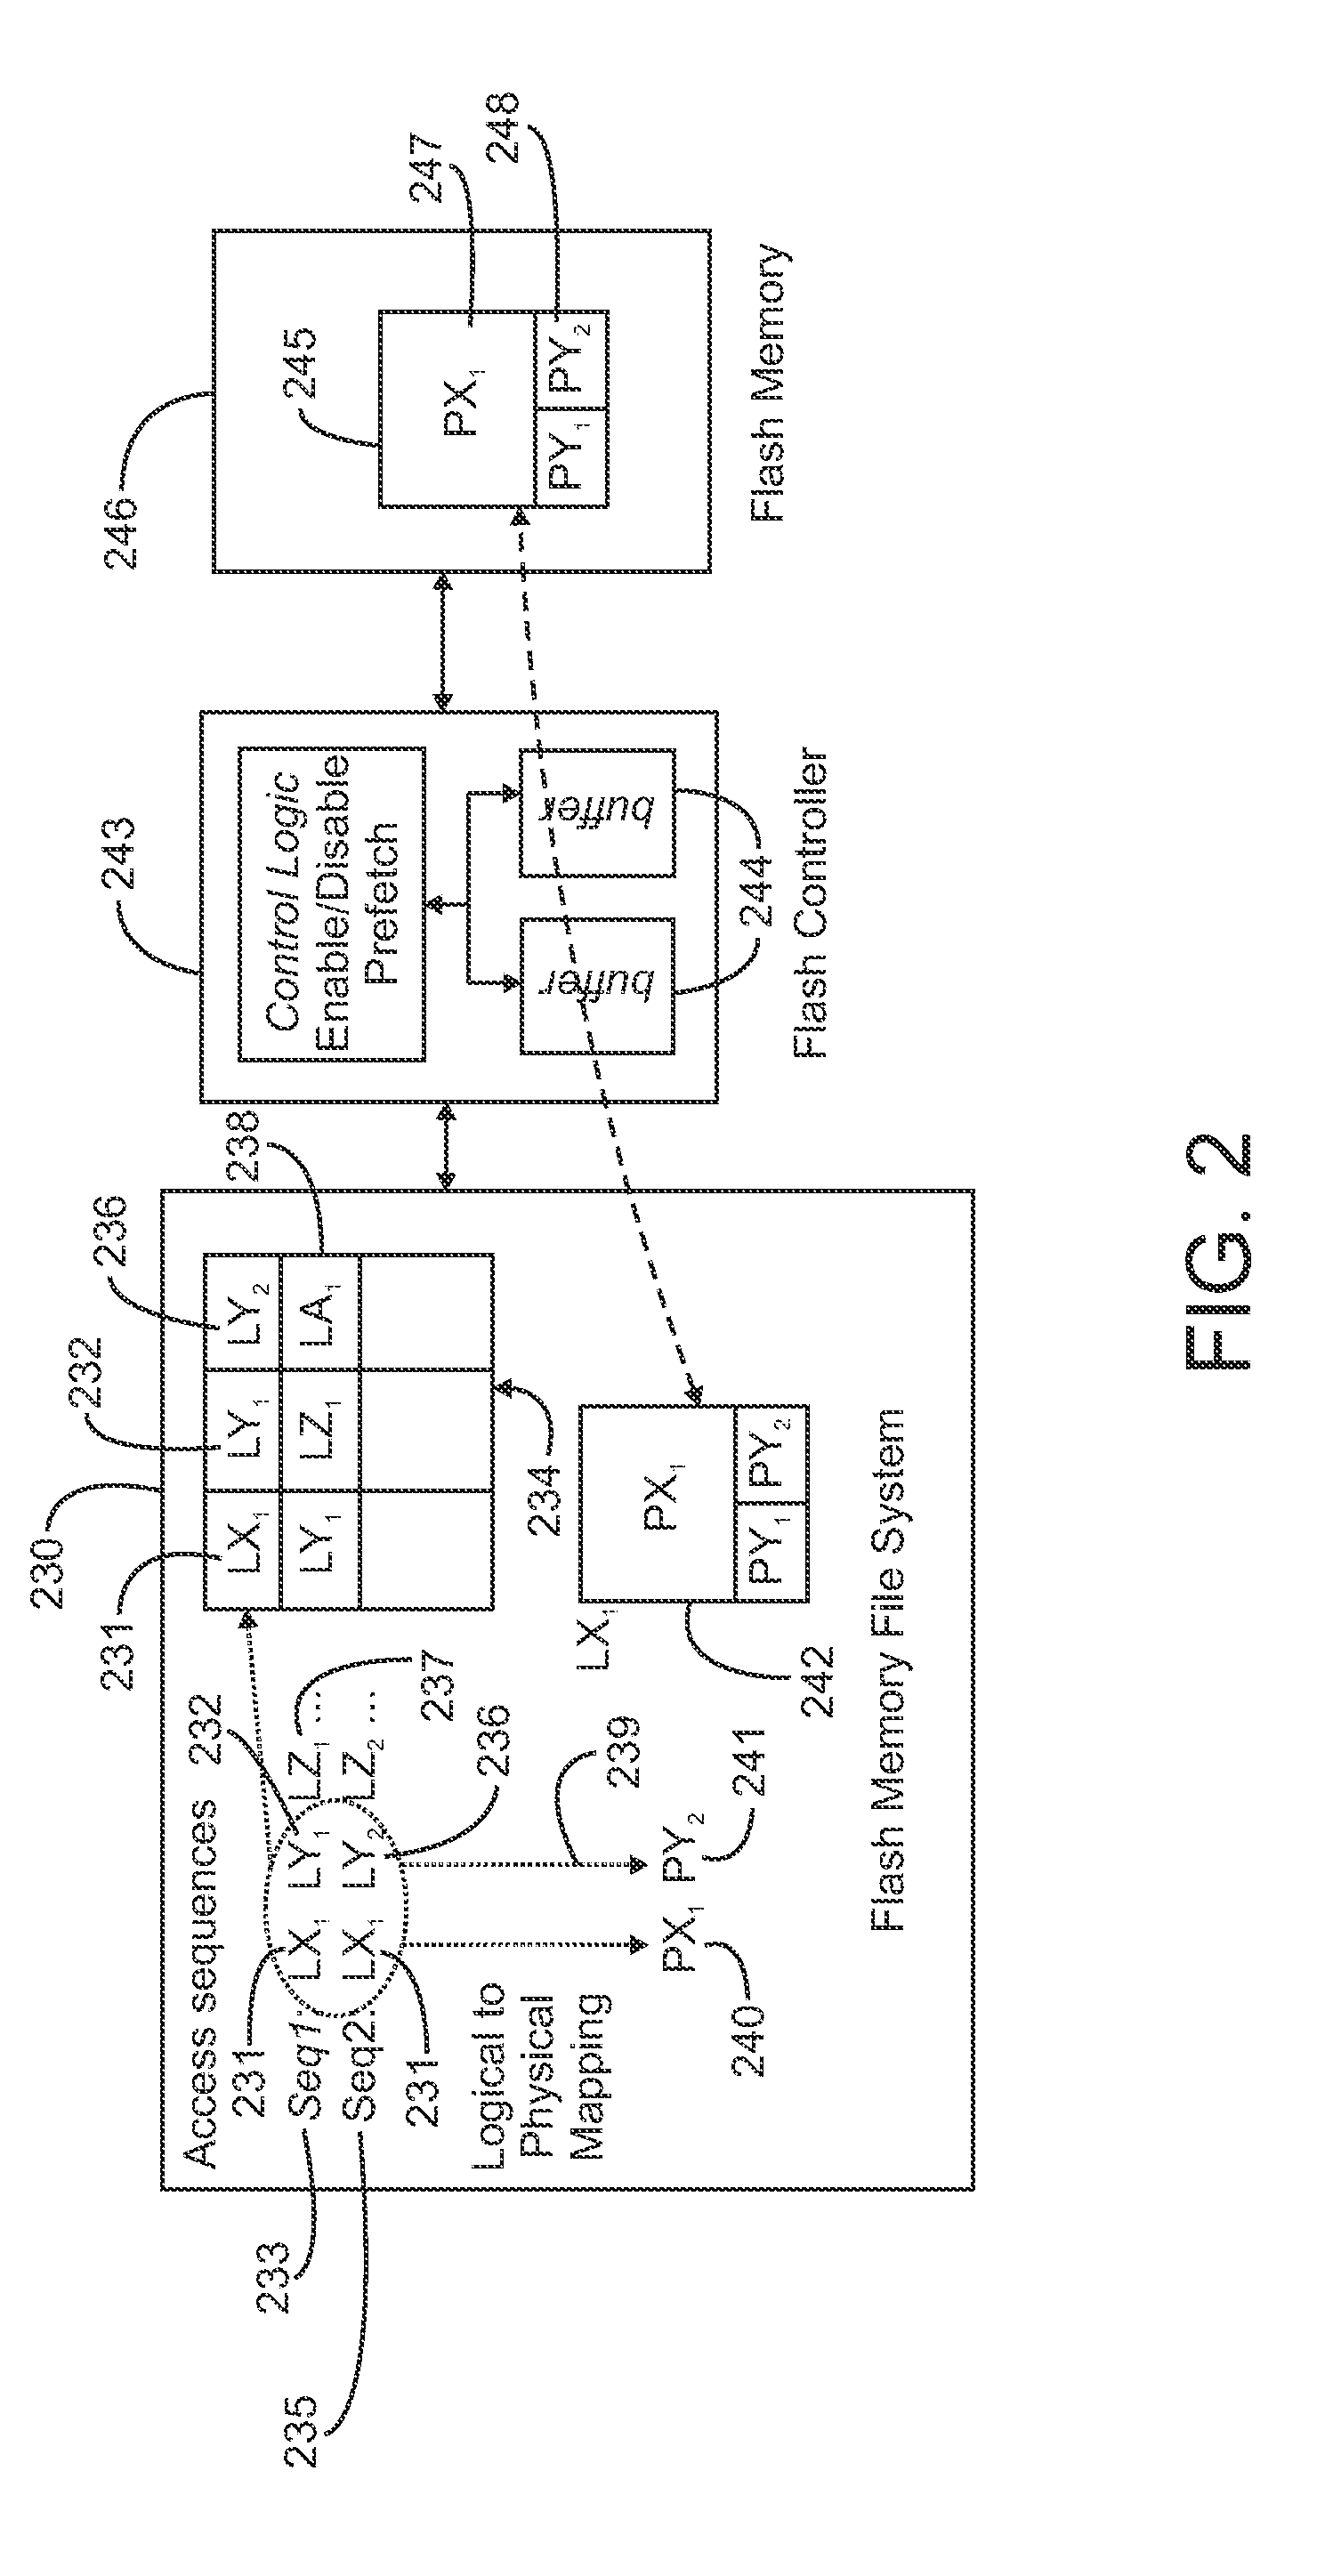 Storing Multi-Stream Non-Linear Access Patterns in a Flash Based File-System